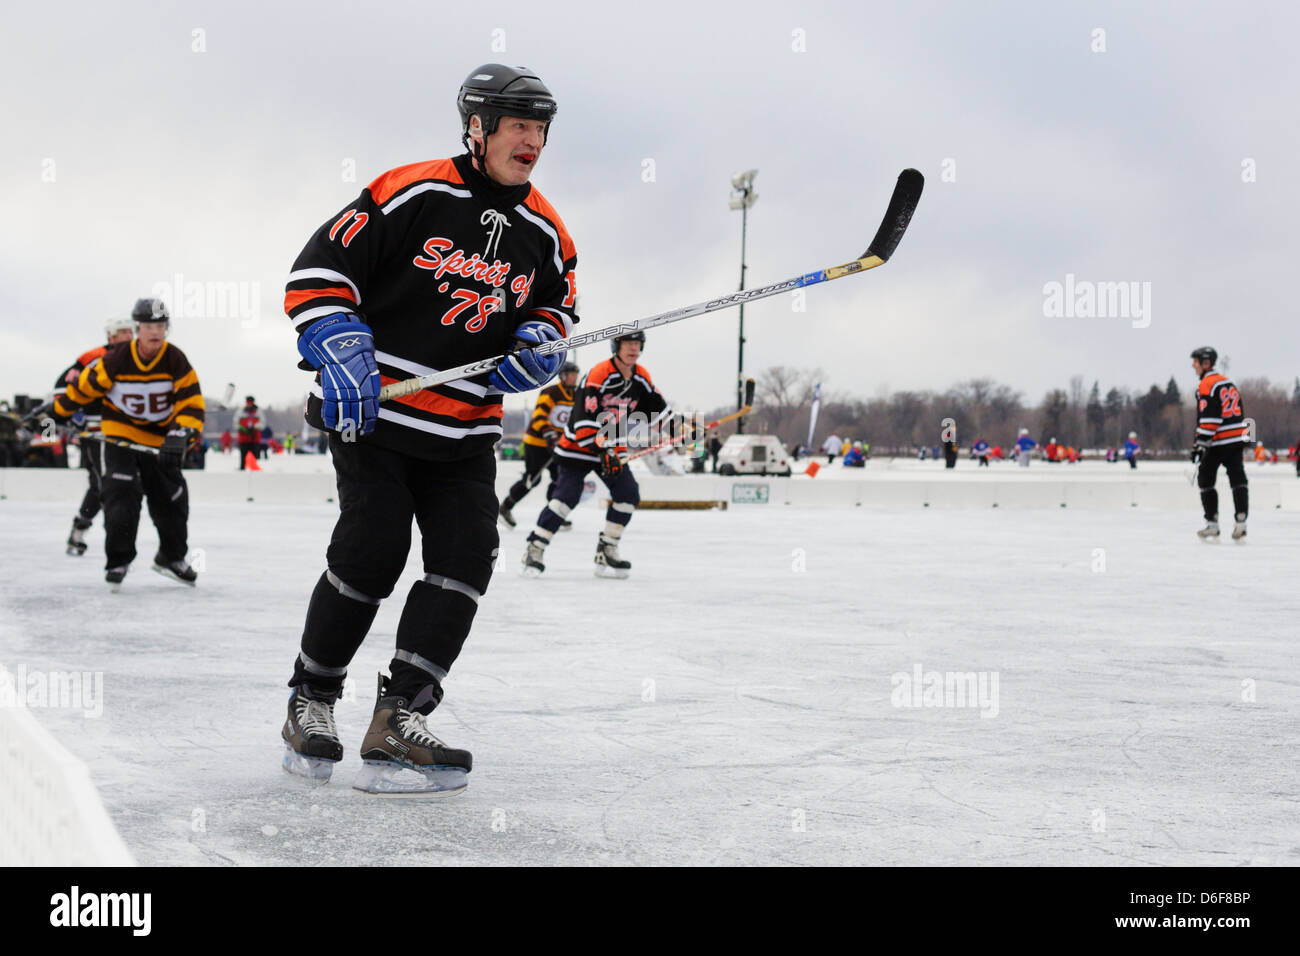 A middle aged player competes at the U.S. Pond Hockey Championships on Lake Nokomis on January 19 2013 in Minneapolis, Minnesota Stock Photo